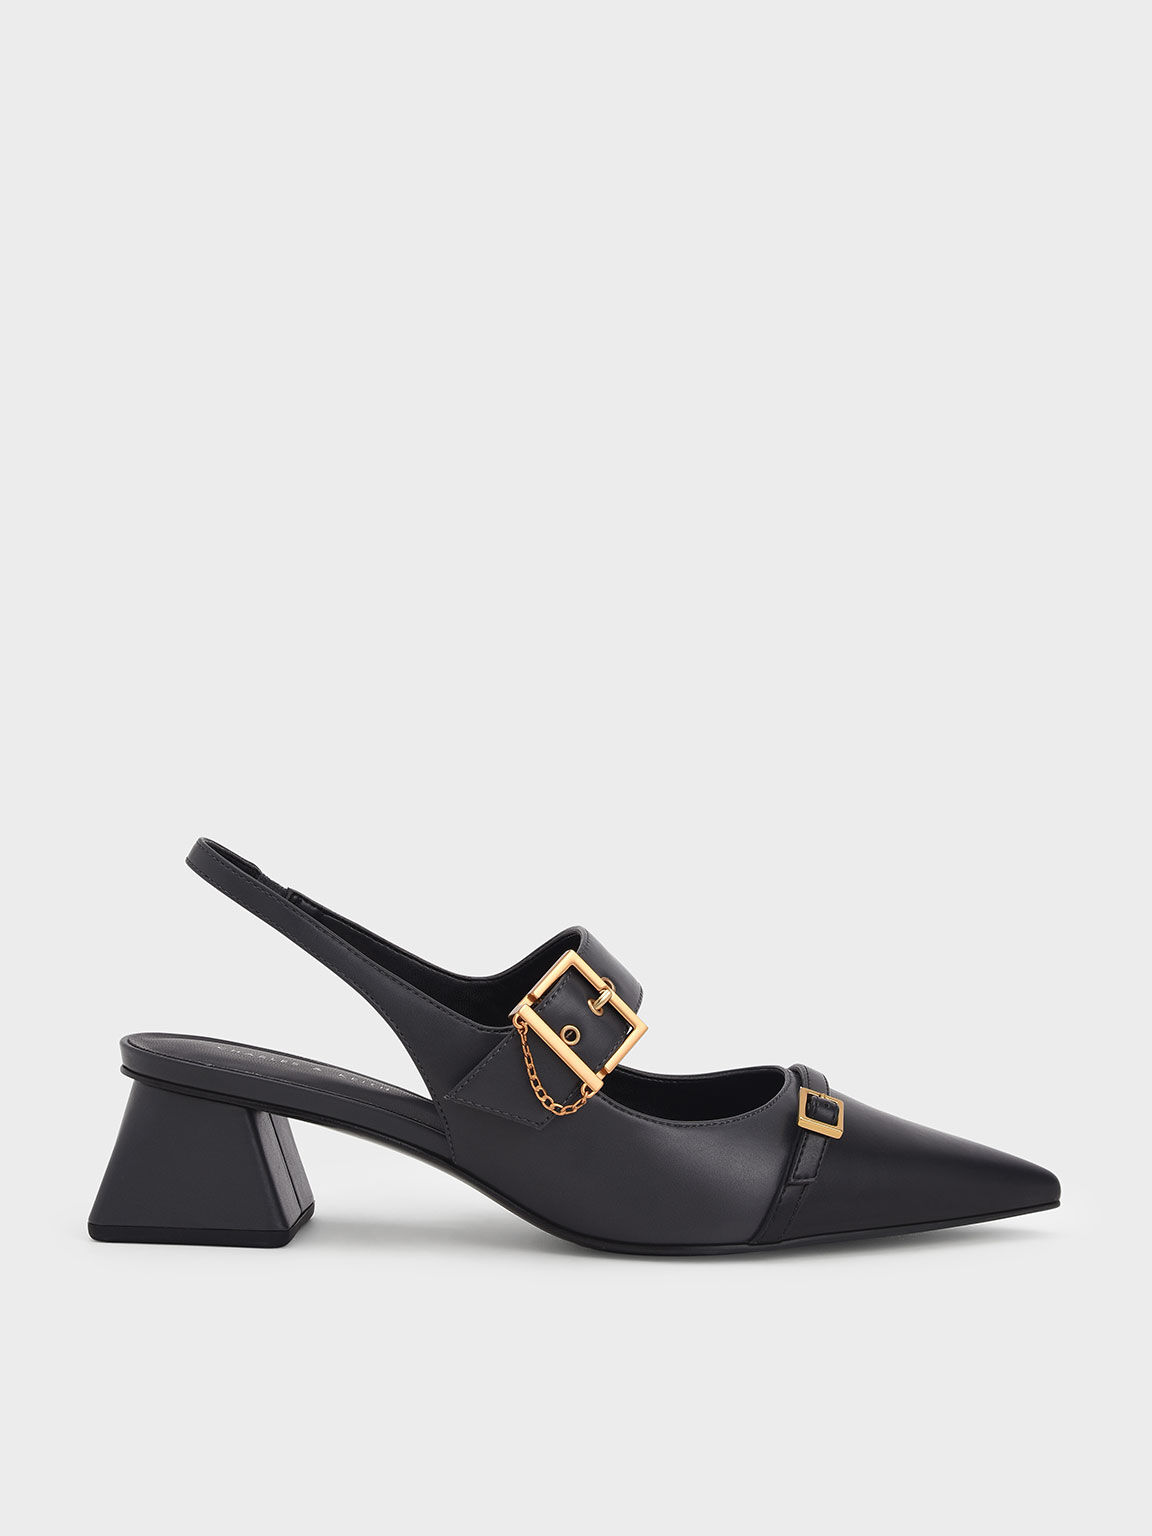 Lunar New Year Collection: Double Buckle Flare Heel Slingback Pumps, Dark Blue, hi-res